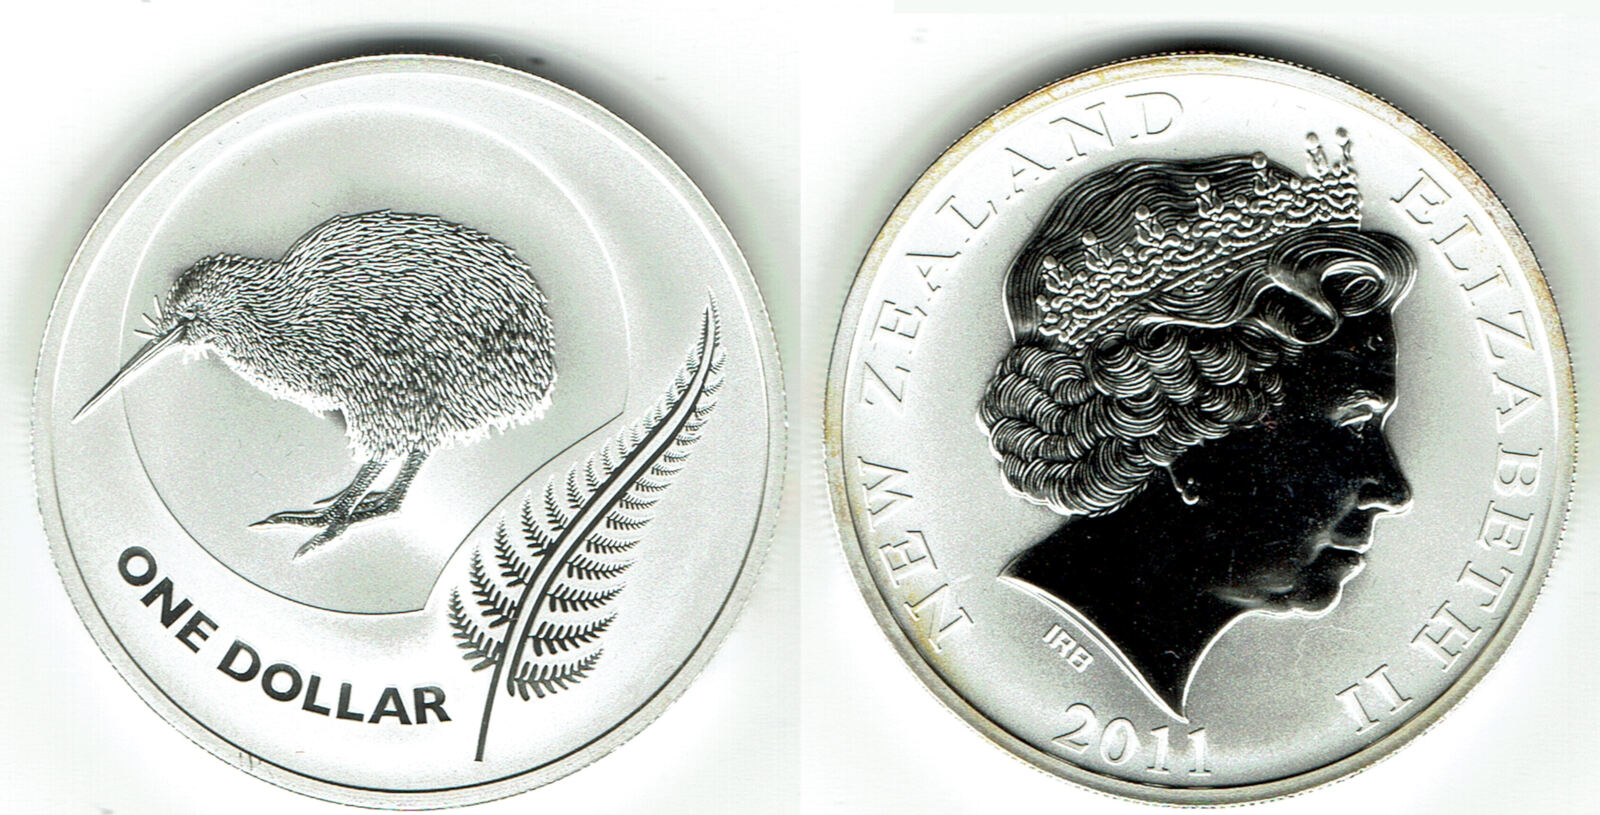 Details about   New Zealand 2011 Kiwi Bird Dollar 1oz Silver Coin,Proof 